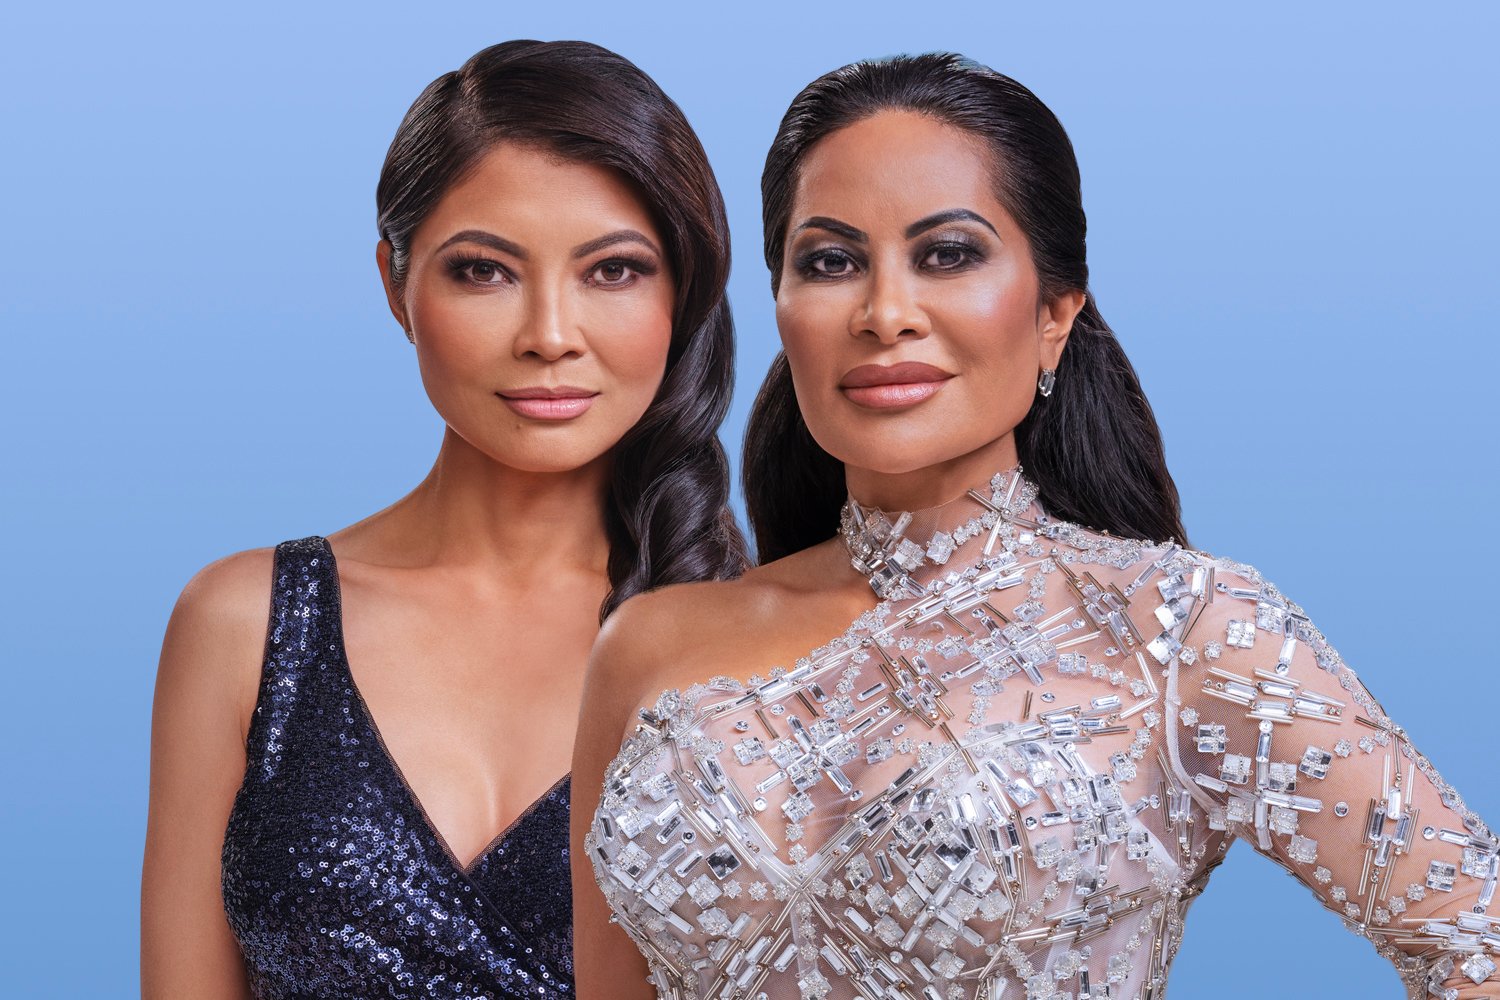 ‘RHOSLC’: Jen Shah Slams Co-Star Jennie Nguyen for Offensive Posts and ‘Disingenuous Apology’